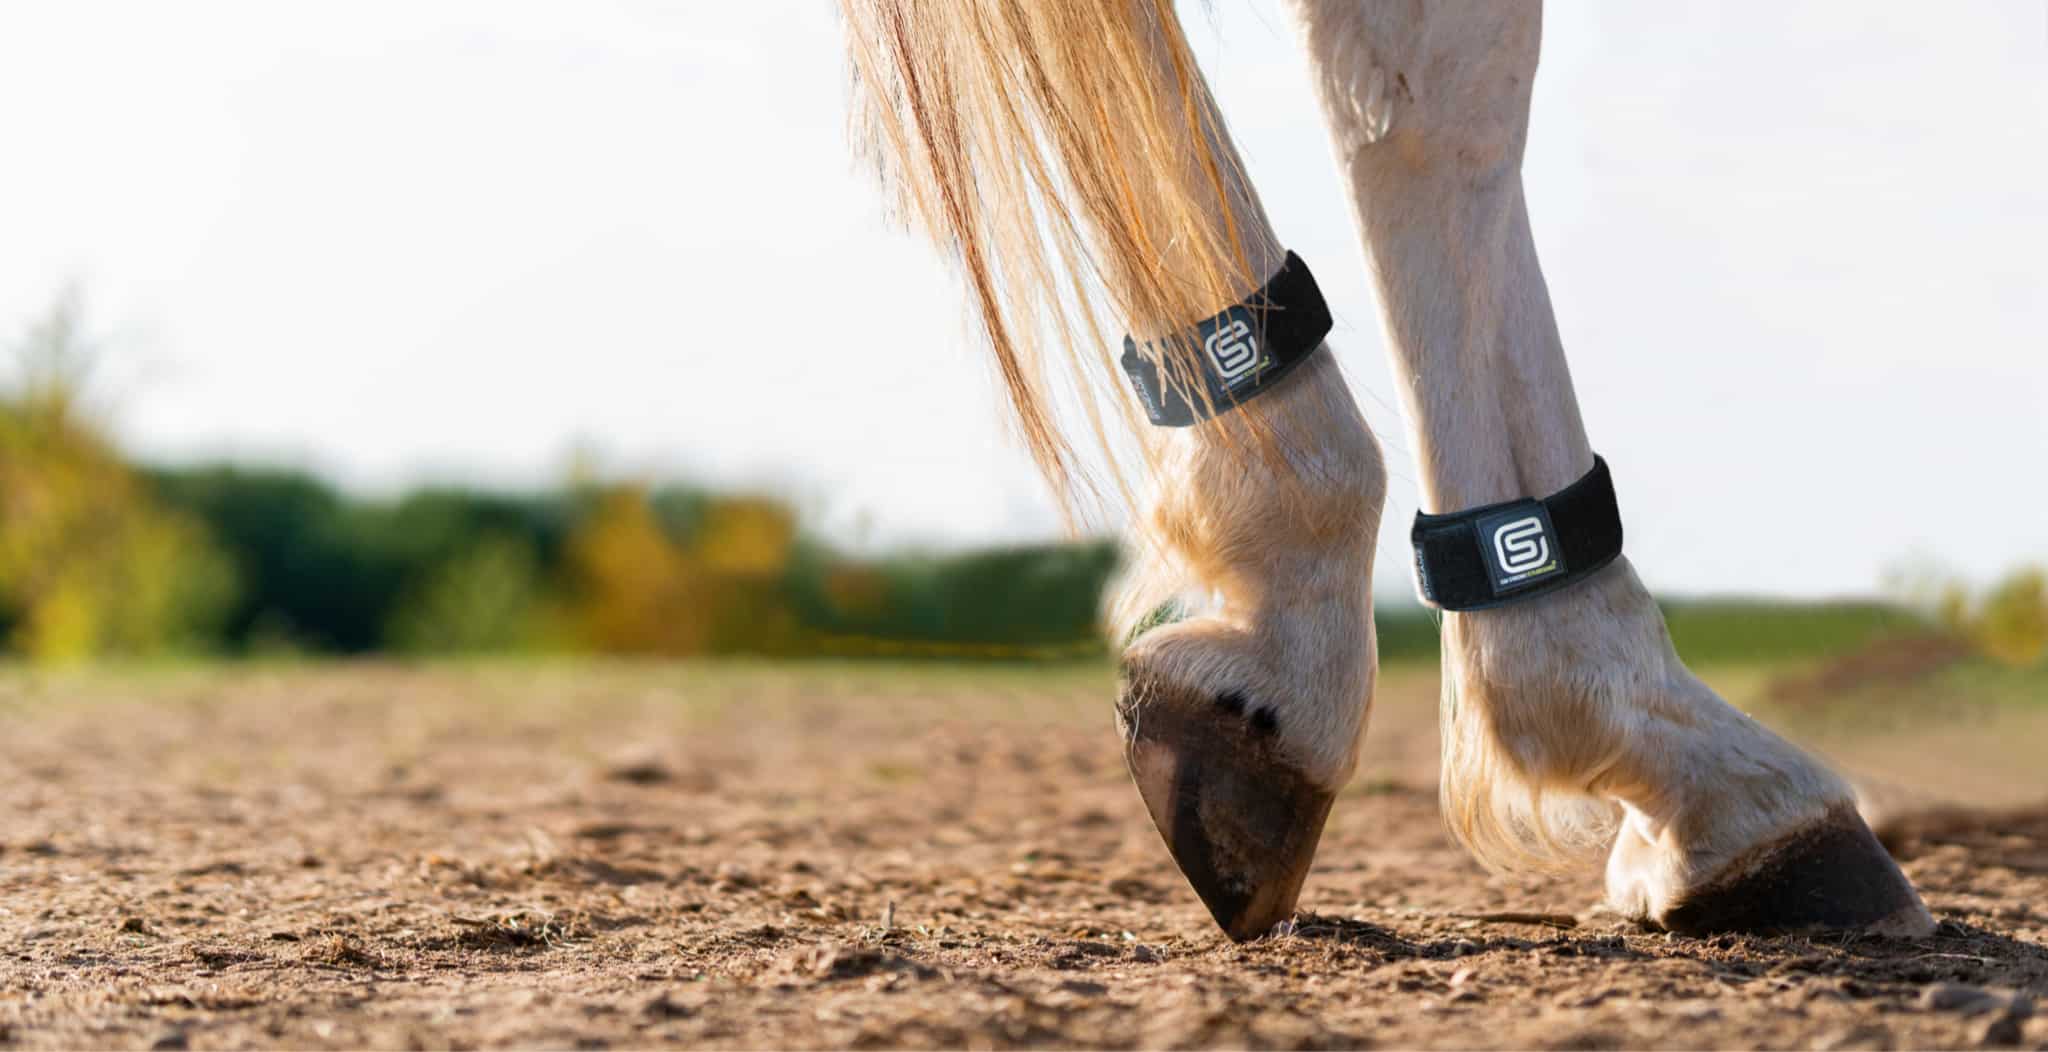 EQU Streamz advanced magnetic bands for horses for natural pain relief and accelerated recovery.